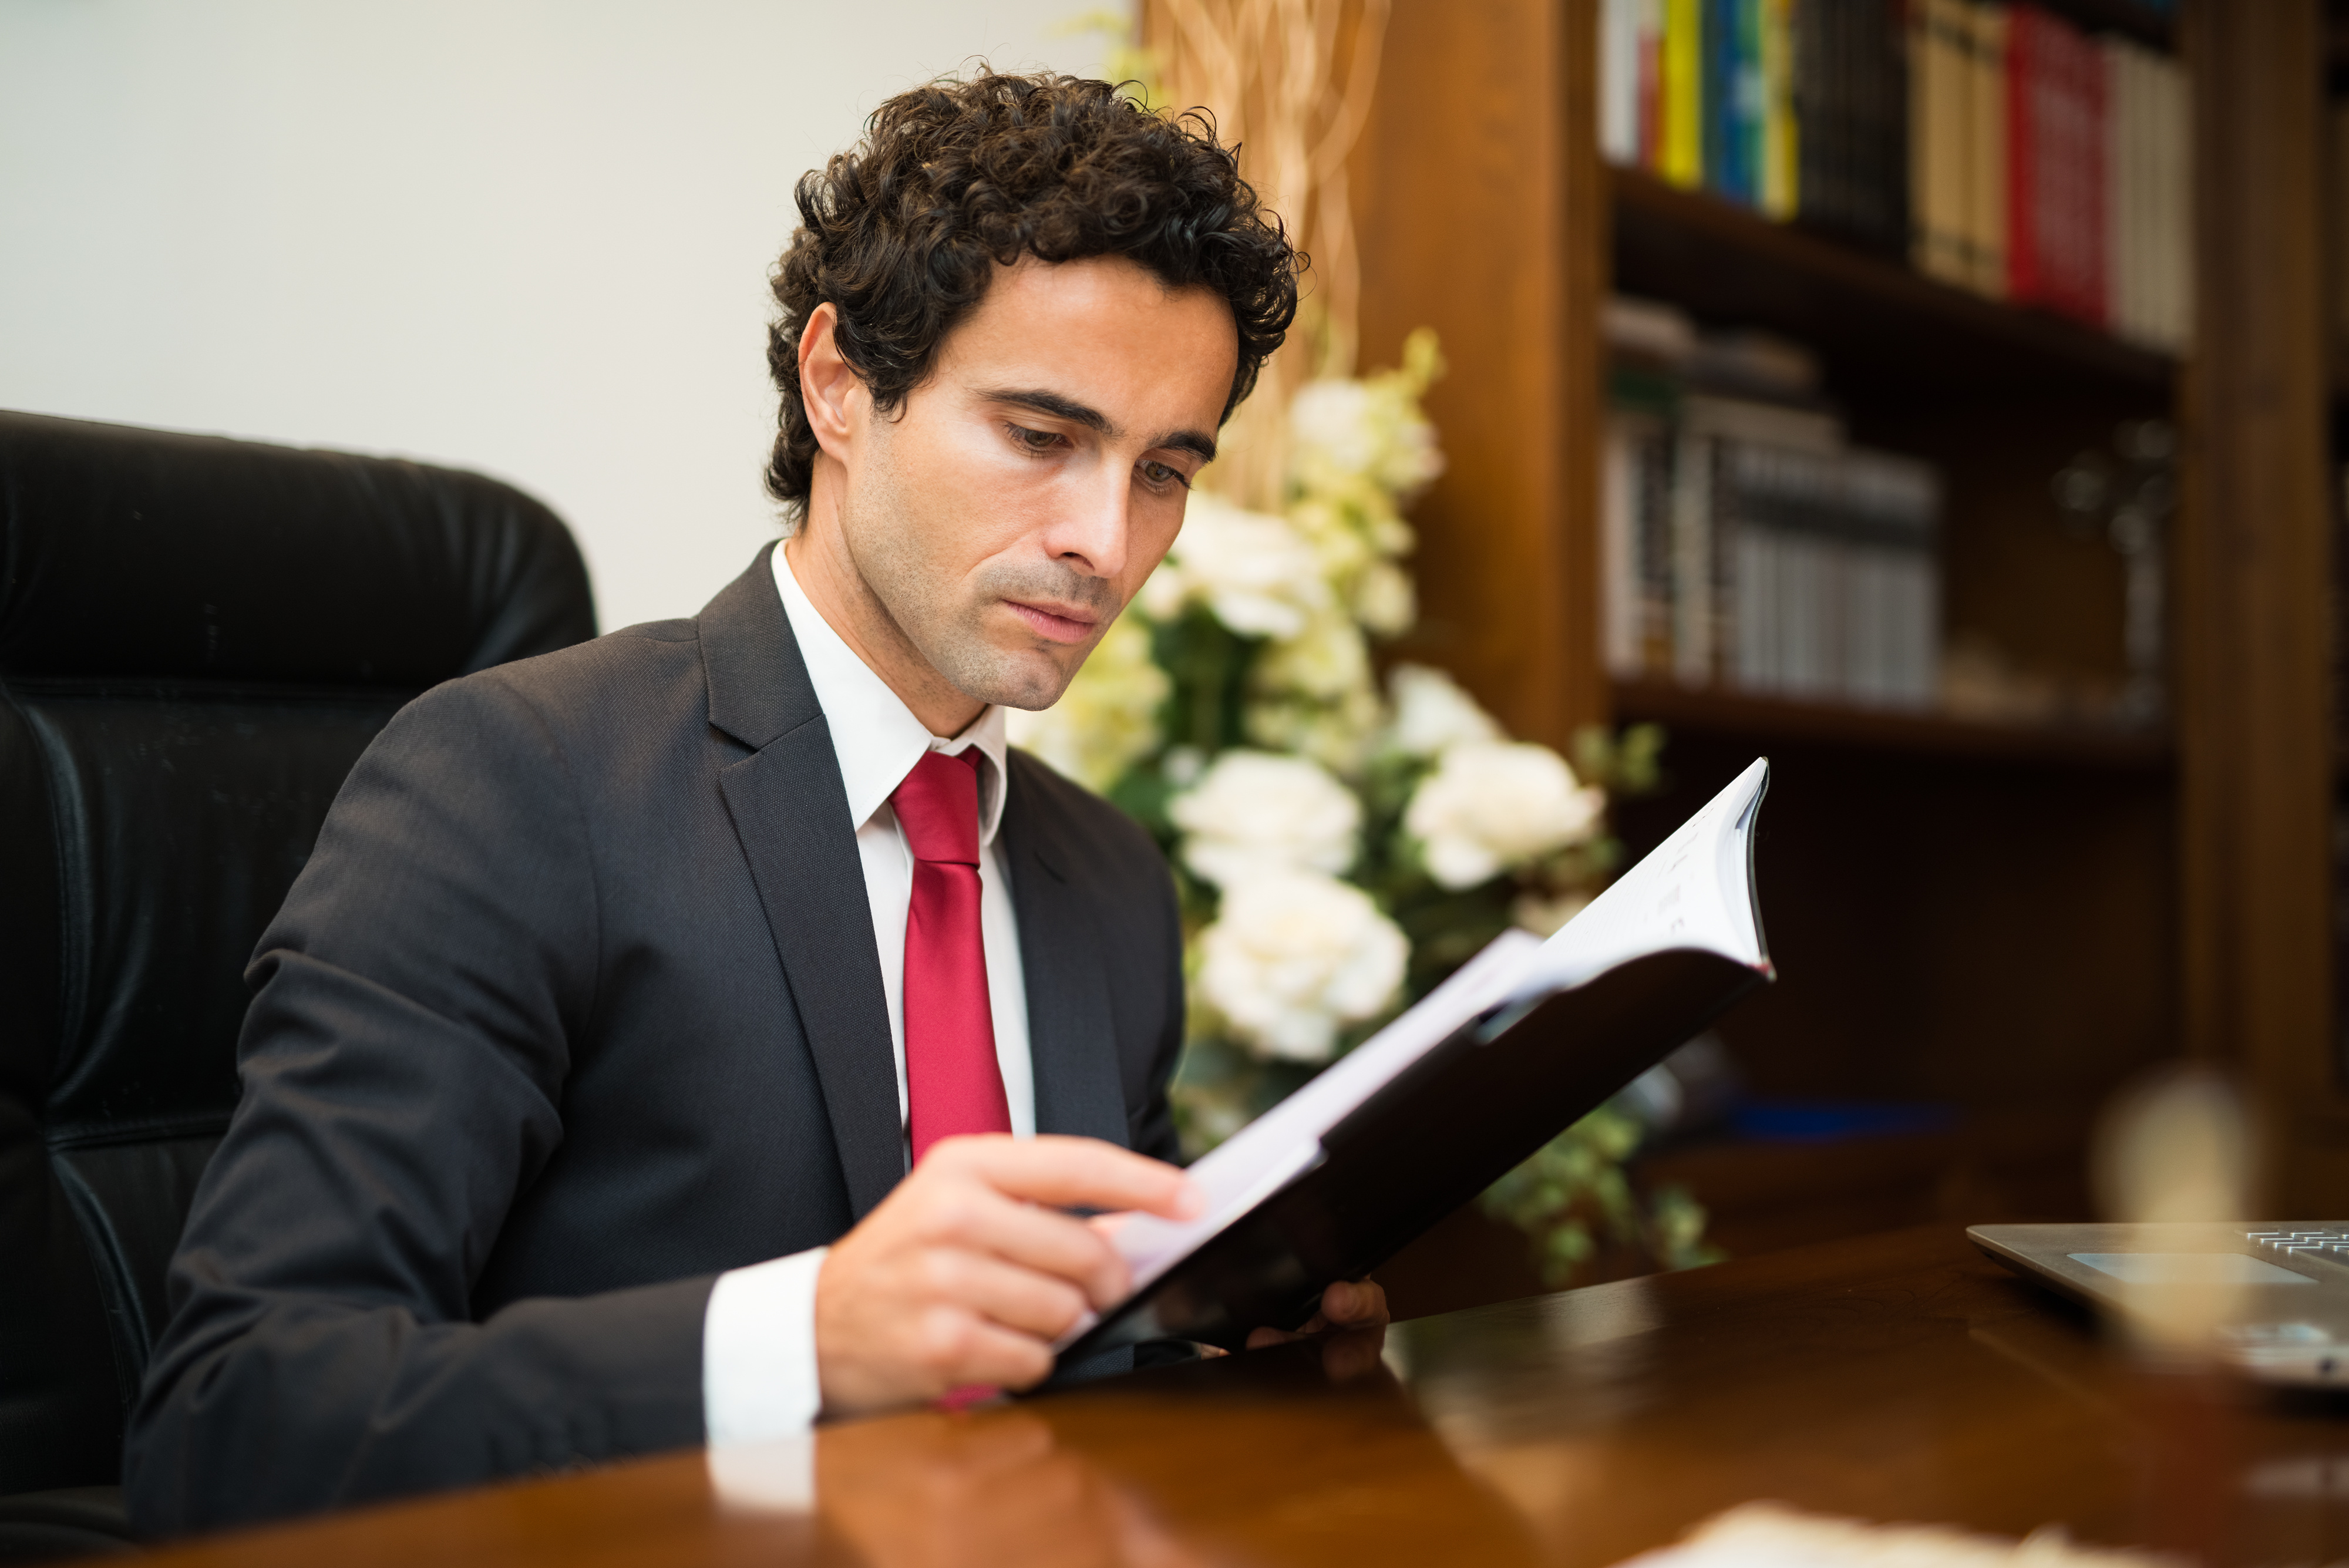 A business man with brown curly hair and light skin wearing a black suit, white shirt, and red tie sits at a desk reading a book. In the background are white flowers in a large vase and a bookshelf.